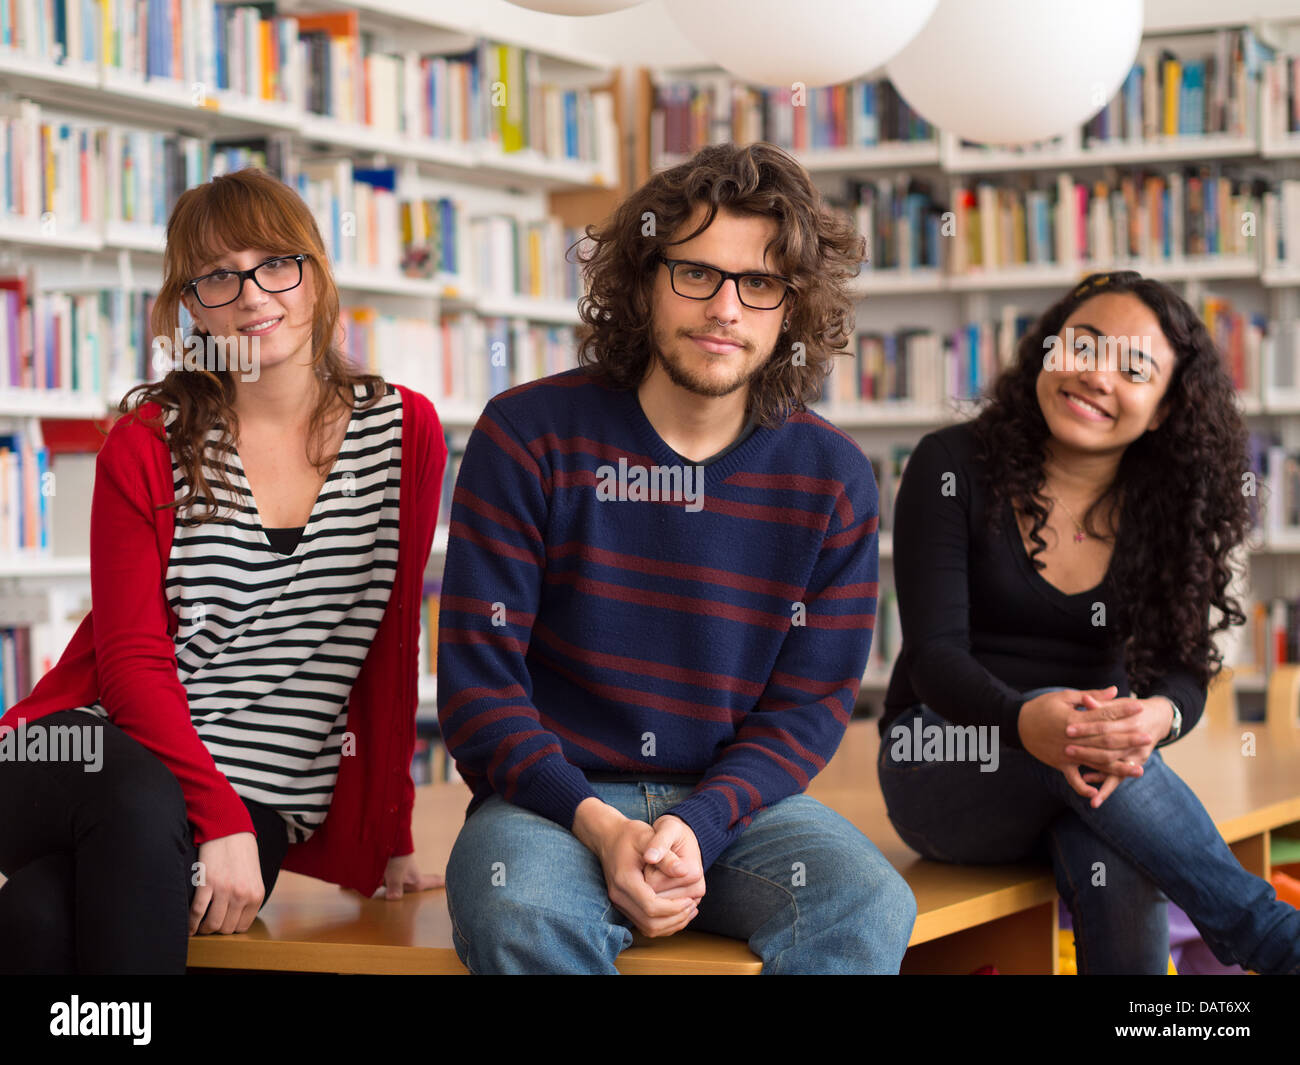 Group of multi ethnic people in library Stock Photo